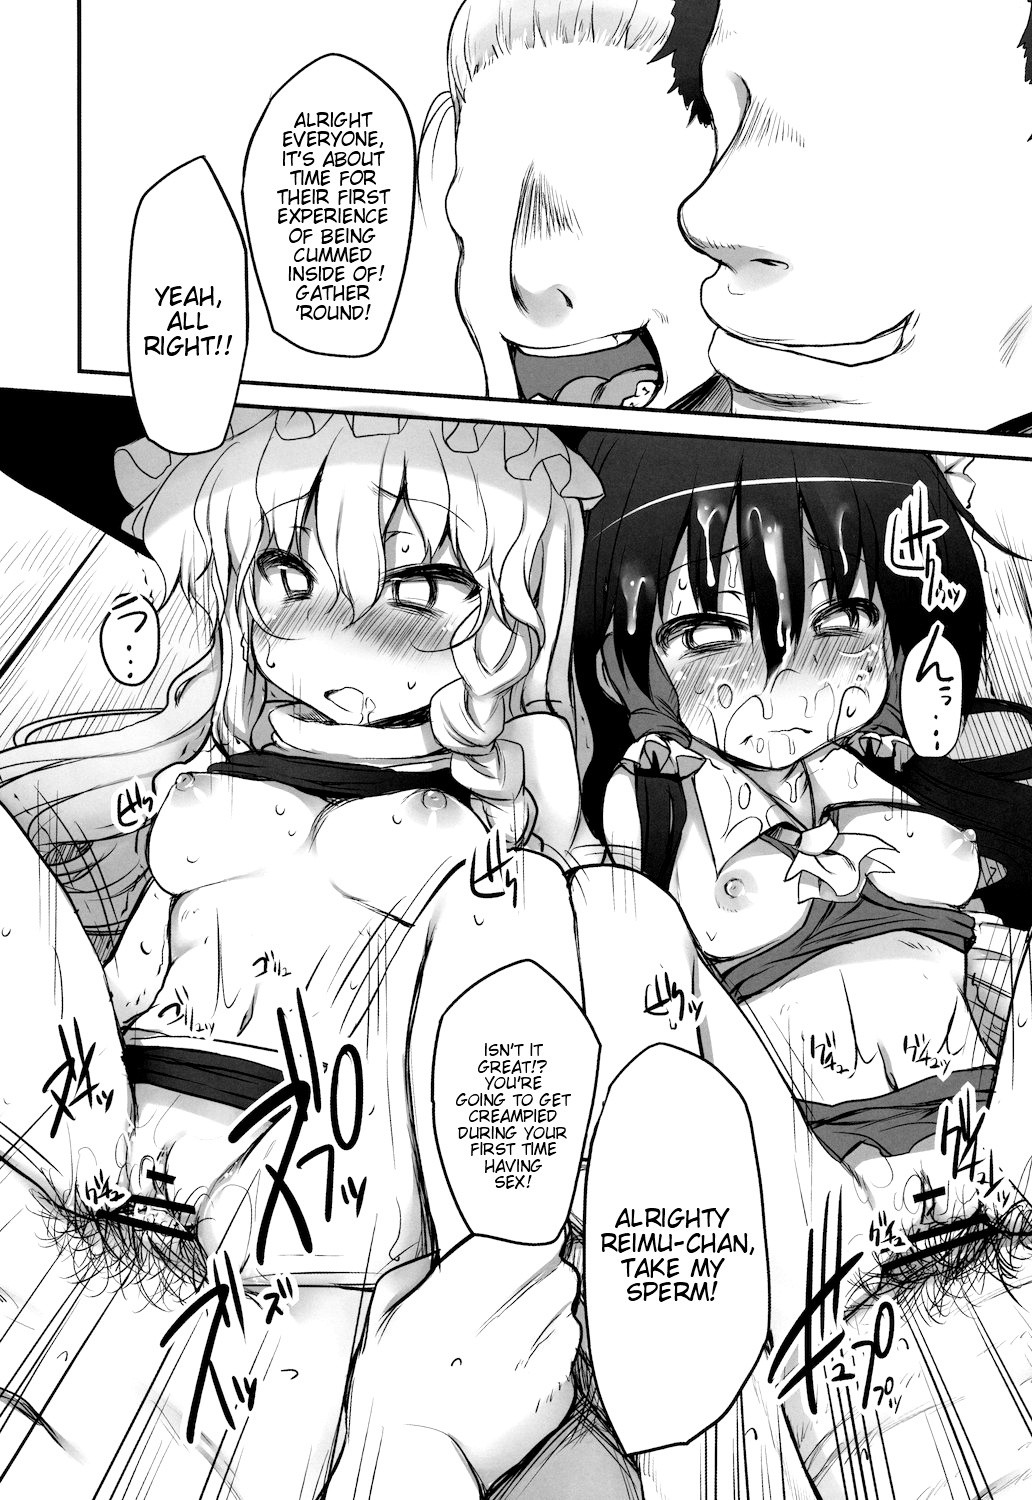 THE PARTY of Gensoukyou -Part I hentai manga picture 24